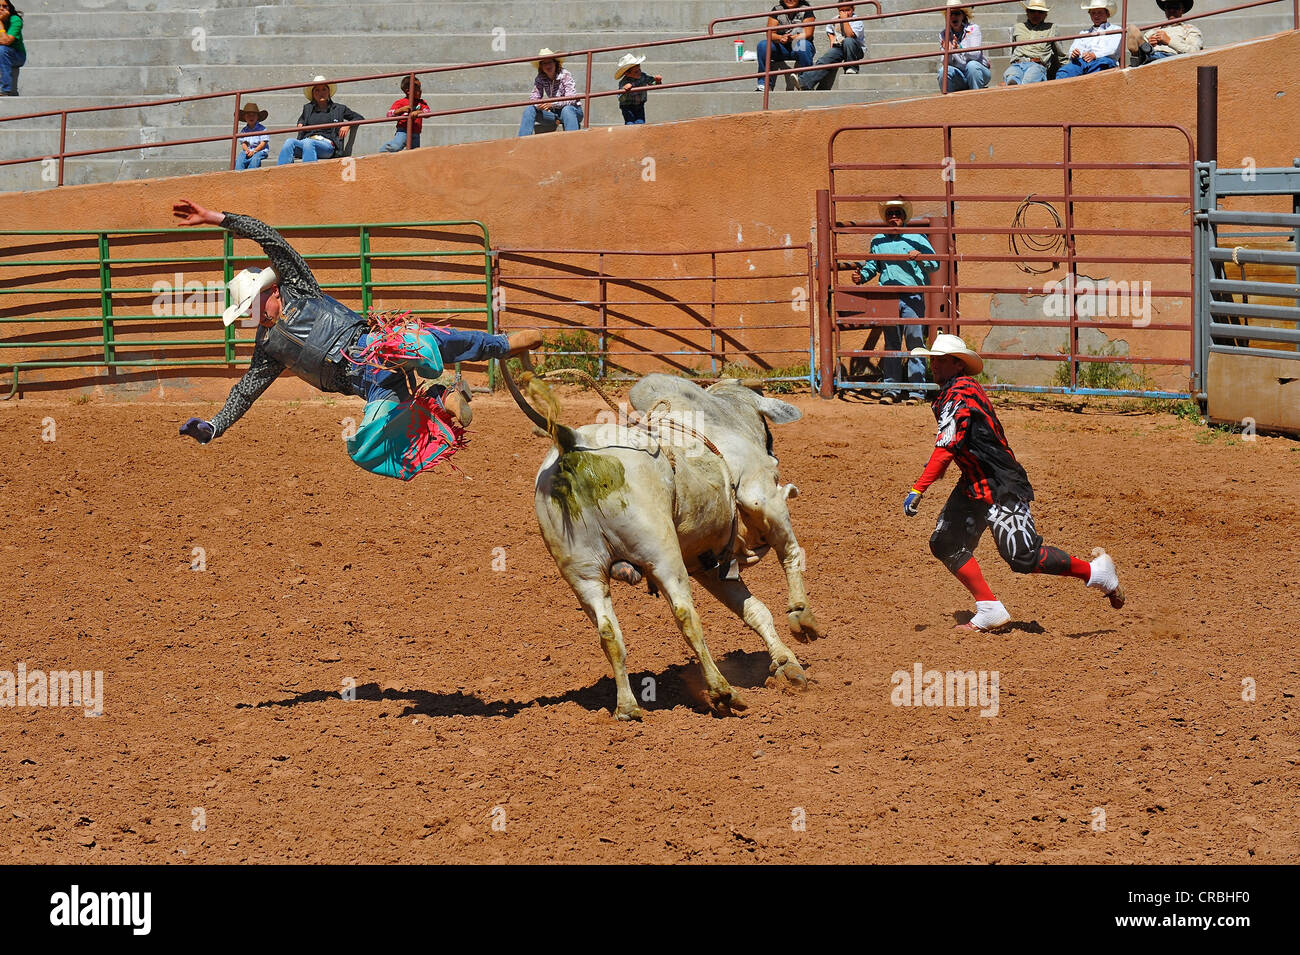 Rodeo, Red Rock Park, Gallup, New Mexico, USA Stock Photo